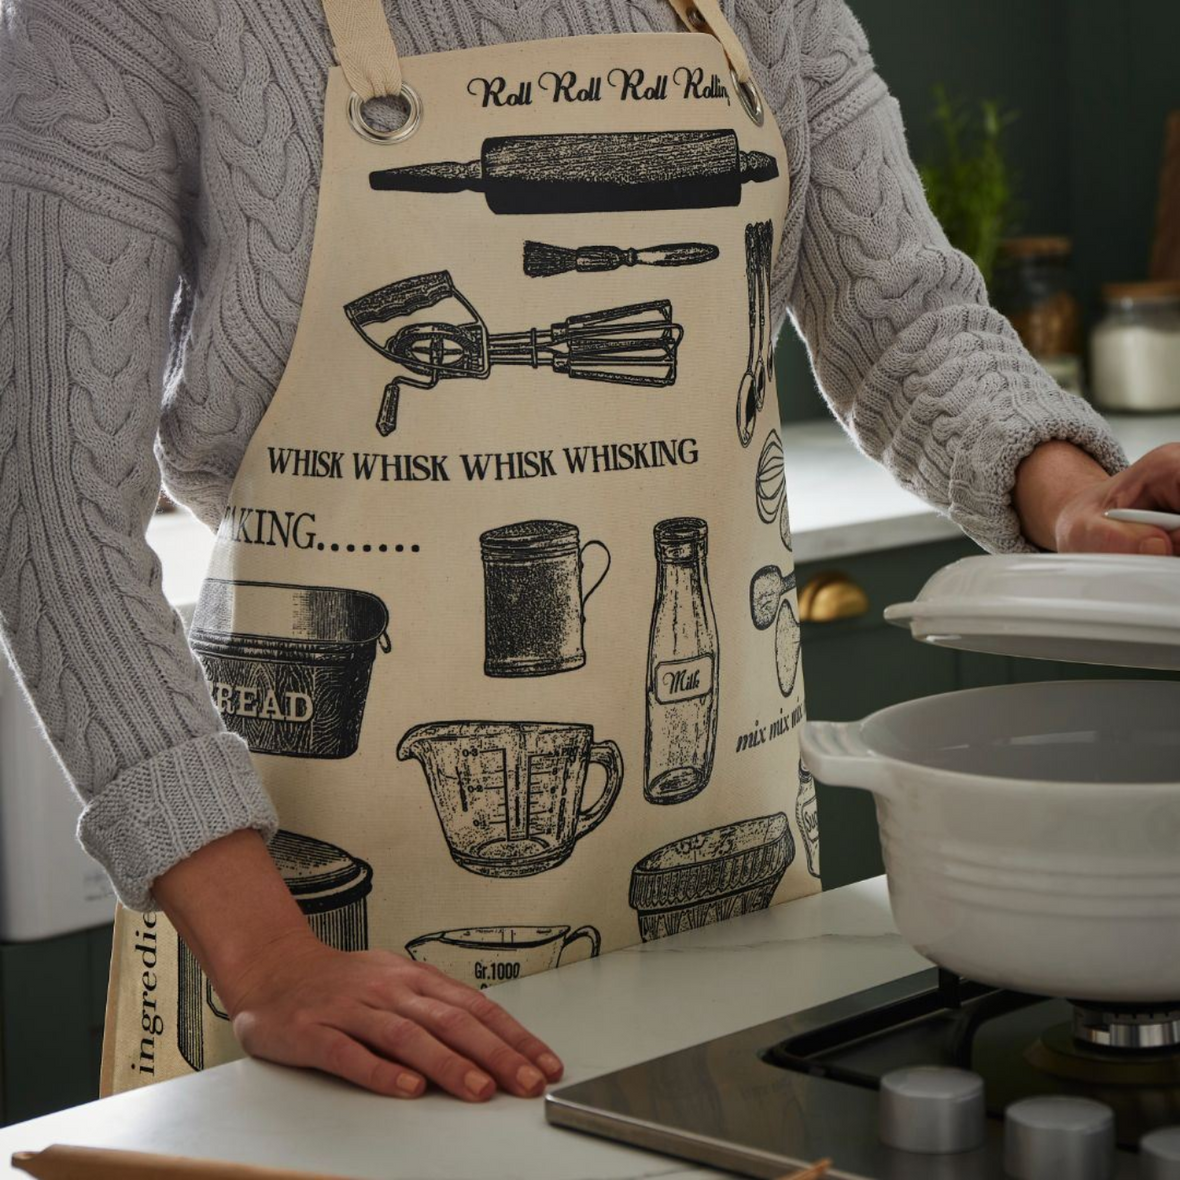 Ulster Weavers Baking Biodegradable Oil Cloth Apron